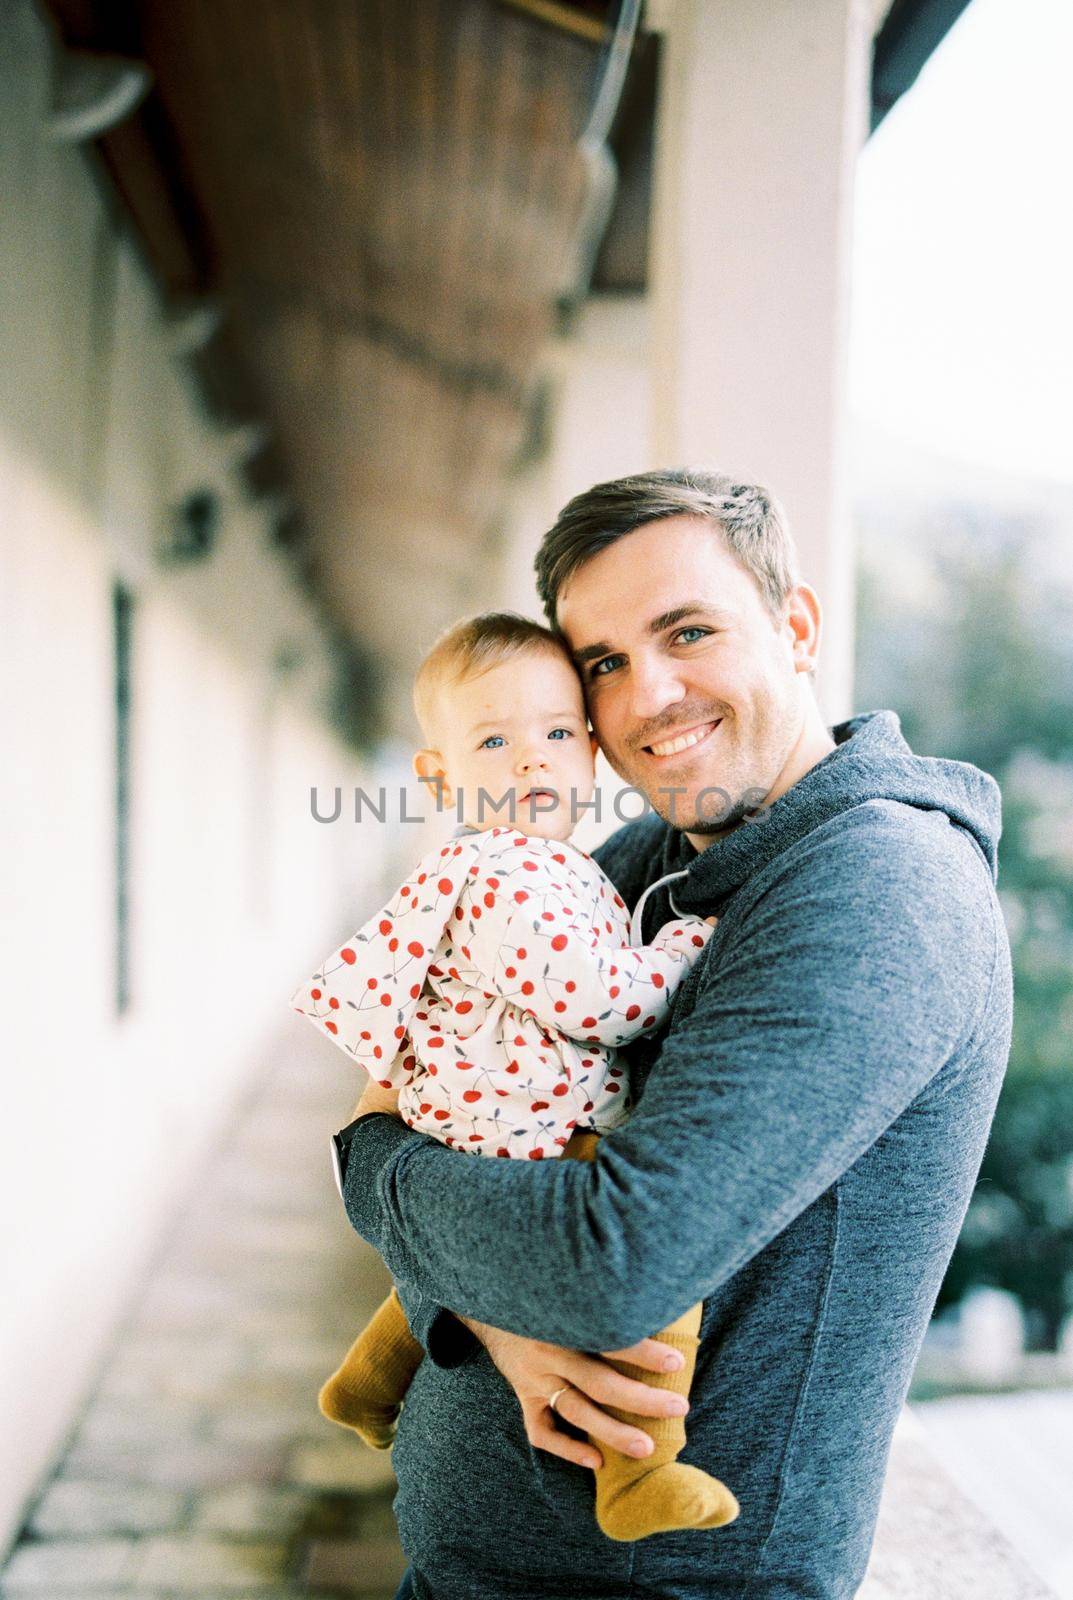 Smiling dad with a baby in his arms stands on the terrace. Portrait. High quality photo